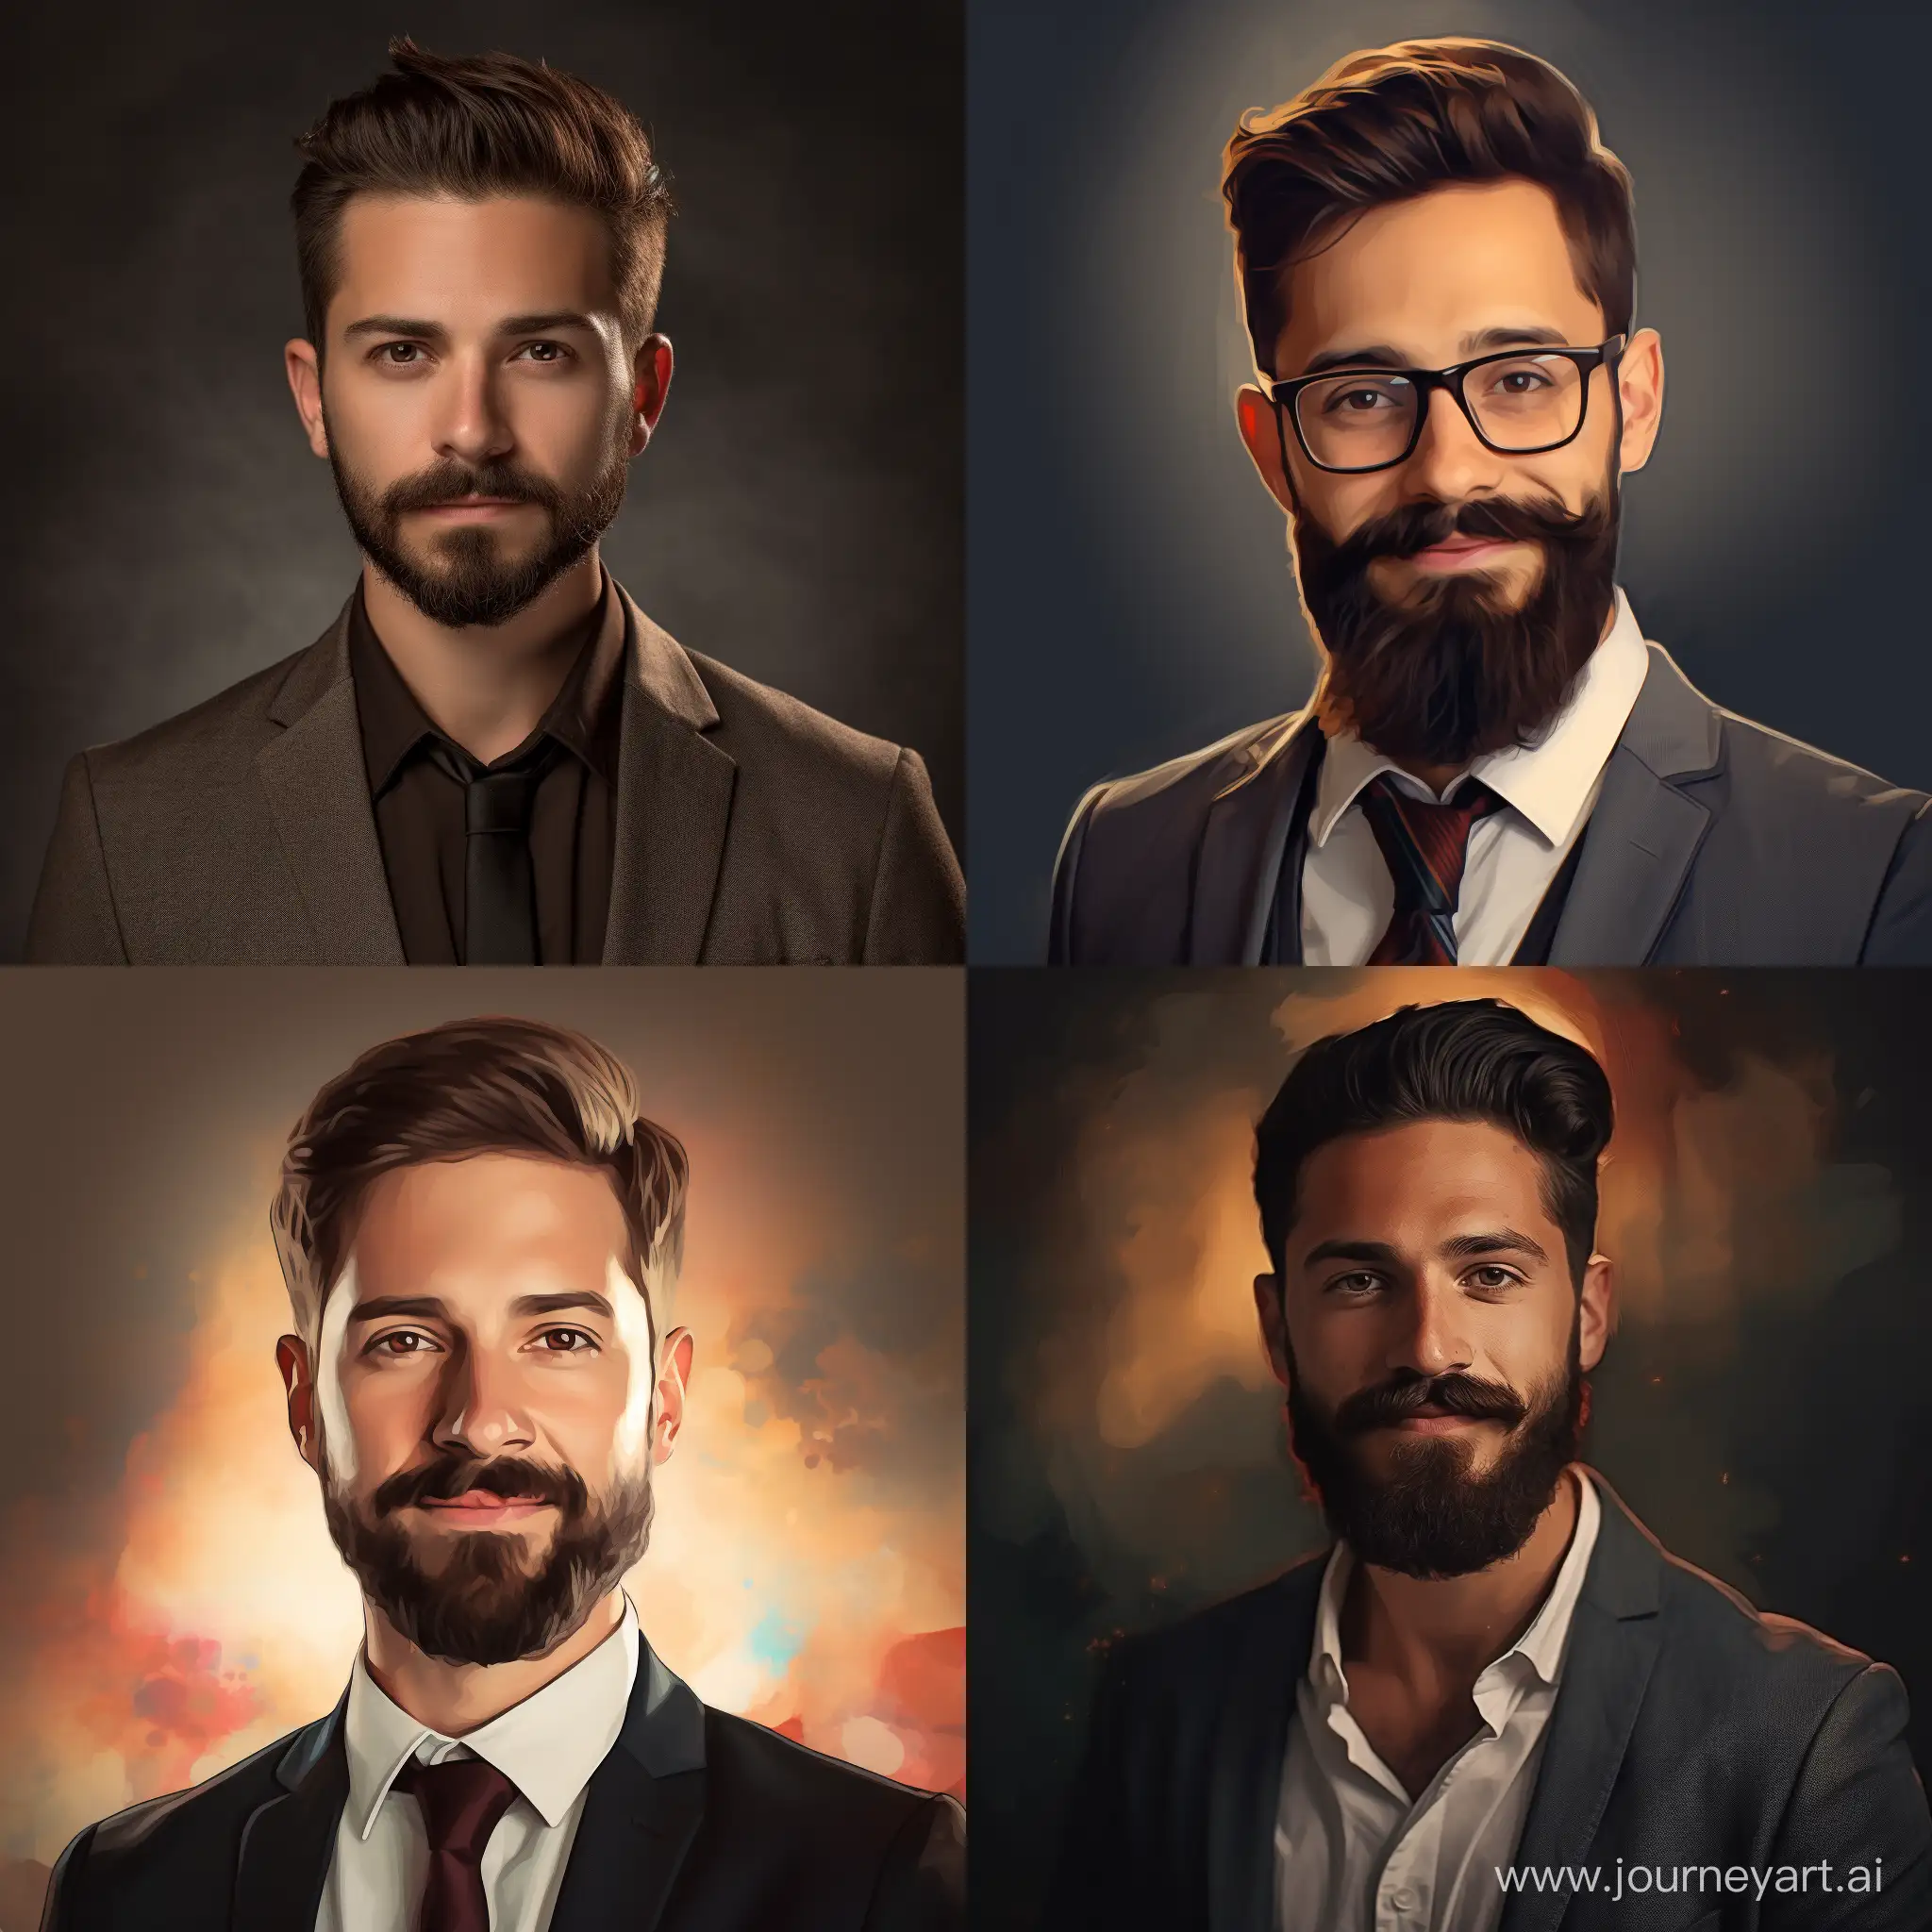 create linkedin profile picture, for digital marketing manager, male, mid 30s, short beard